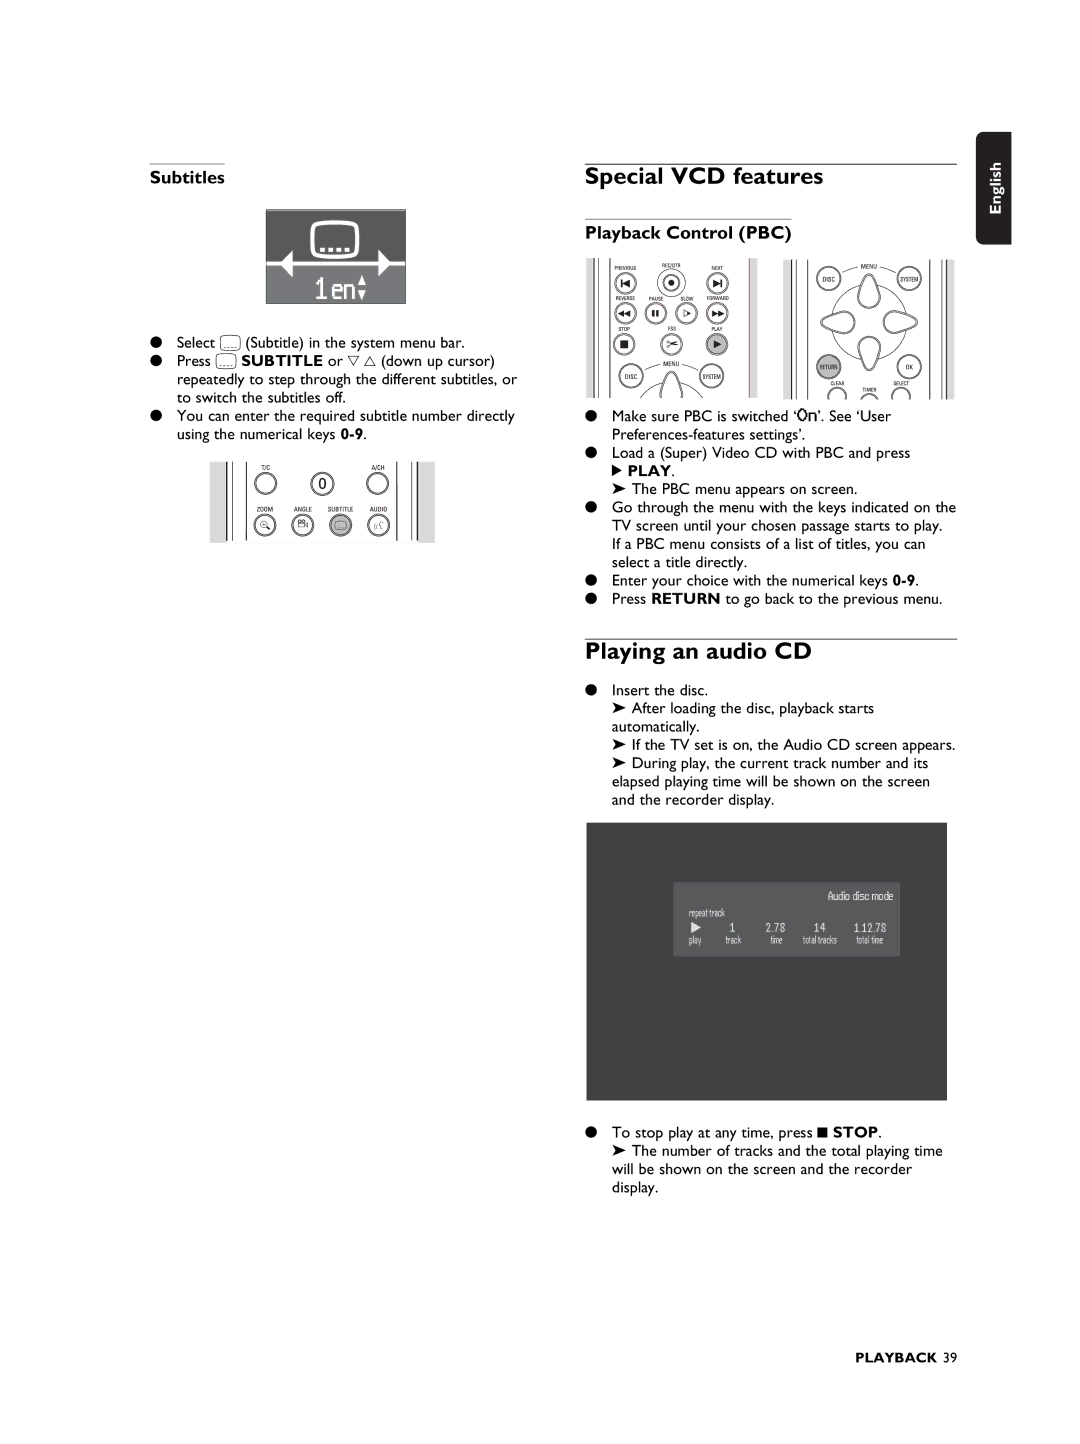 Philips DVDR990 manual Special VCD features, Playing an audio CD, Subtitles, Playback Control PBC 